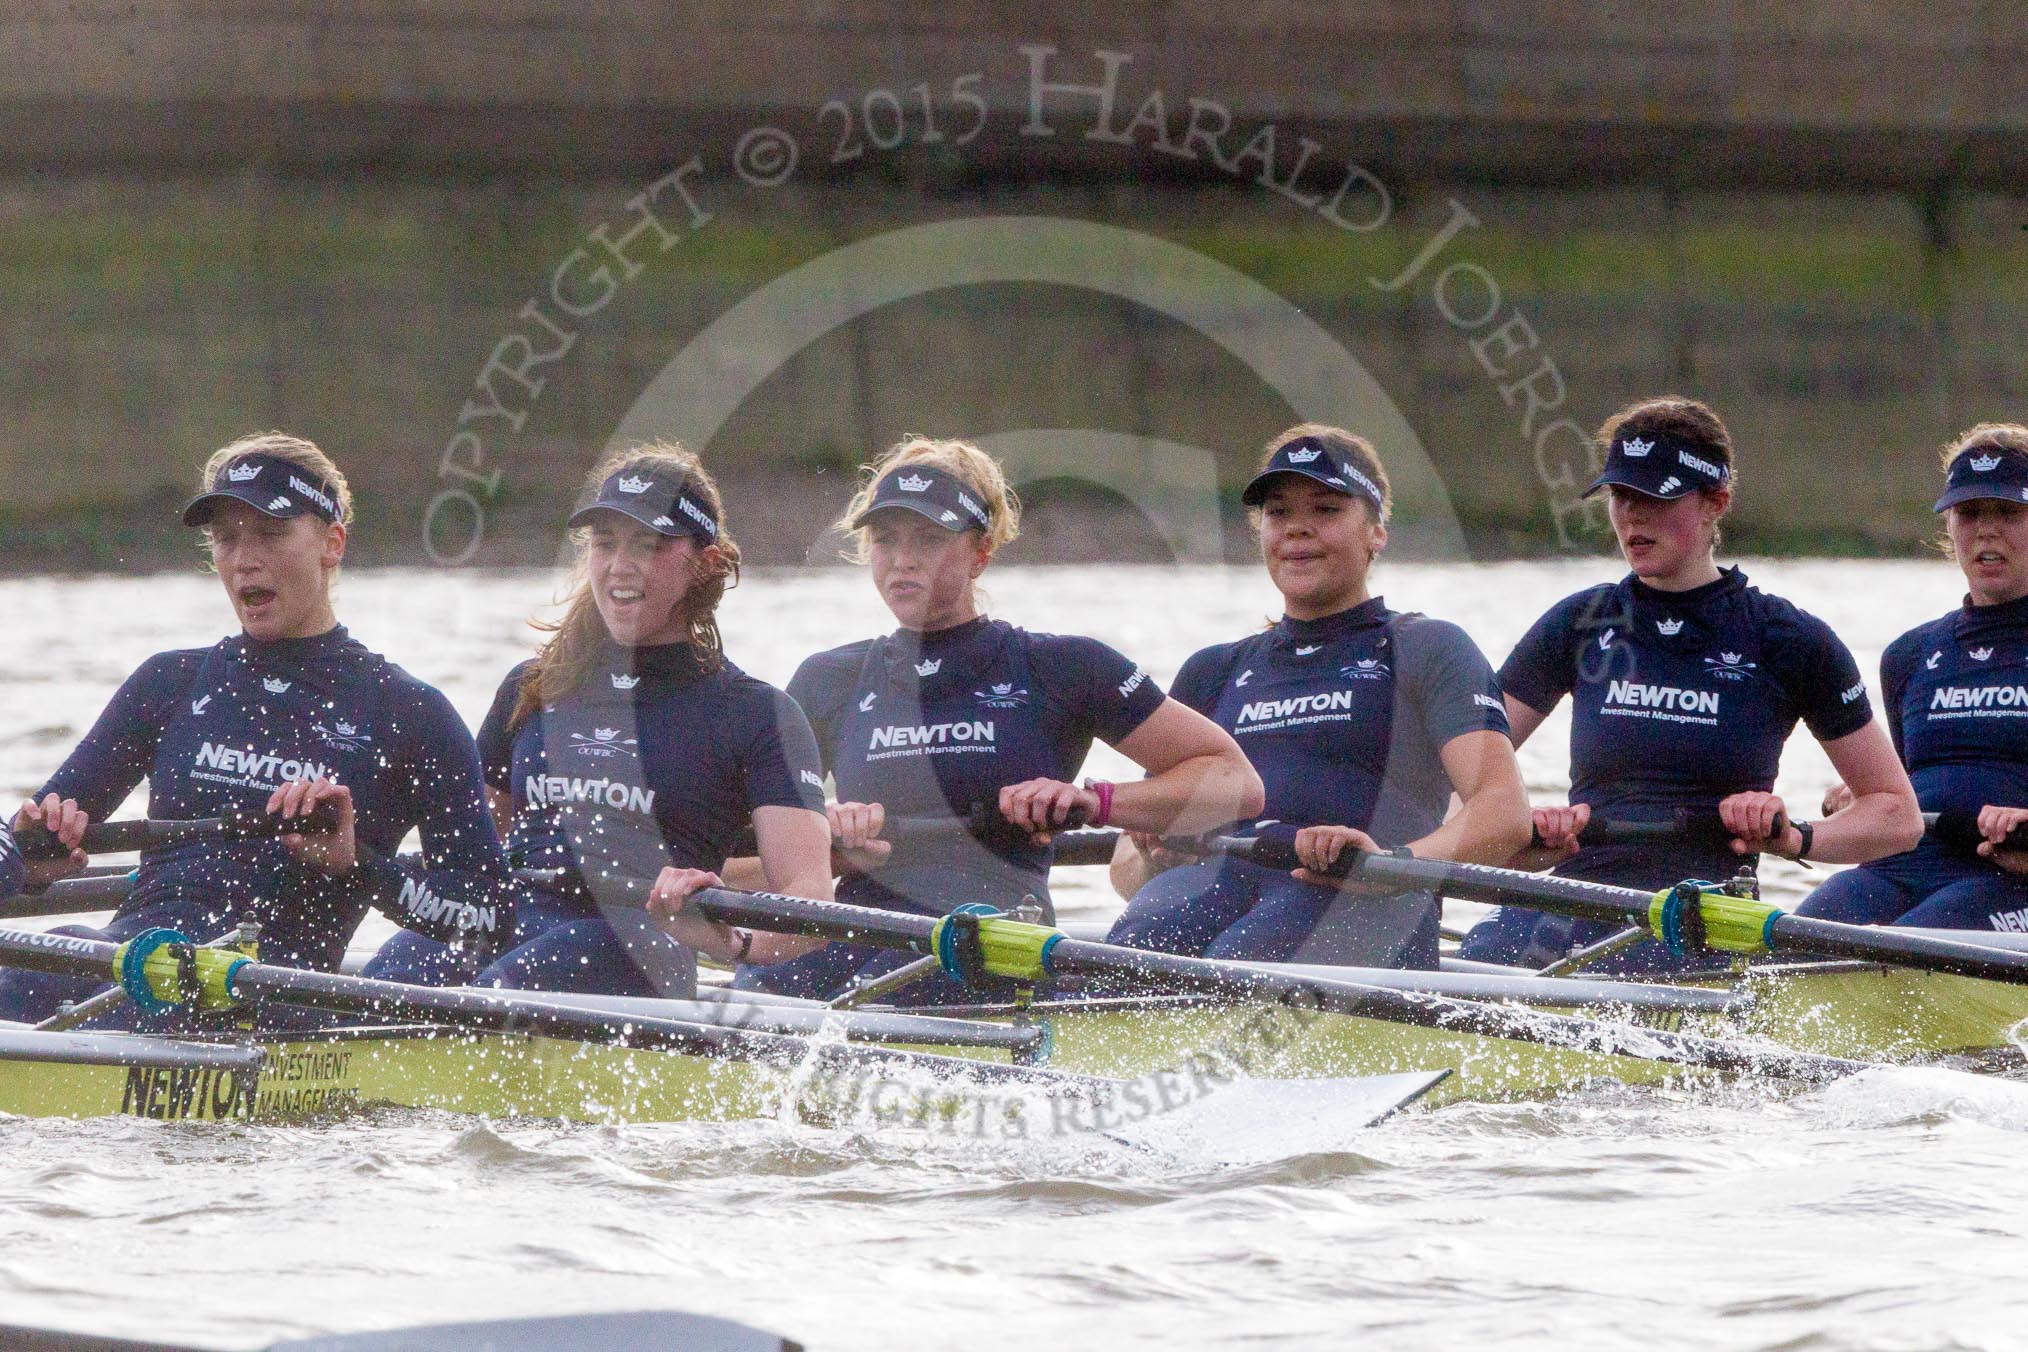 The Boat Race season 2016 - Women's Boat Race Trial Eights (OUWBC, Oxford): "Charybdis", here 6-Elo Luik, 5-Ruth Siddorn, 4-Emma Spruce, 3-Lara Pysden, 2-Christina Fleischer, bow-Georgie Daniell.
River Thames between Putney Bridge and Mortlake,
London SW15,

United Kingdom,
on 10 December 2015 at 12:33, image #282